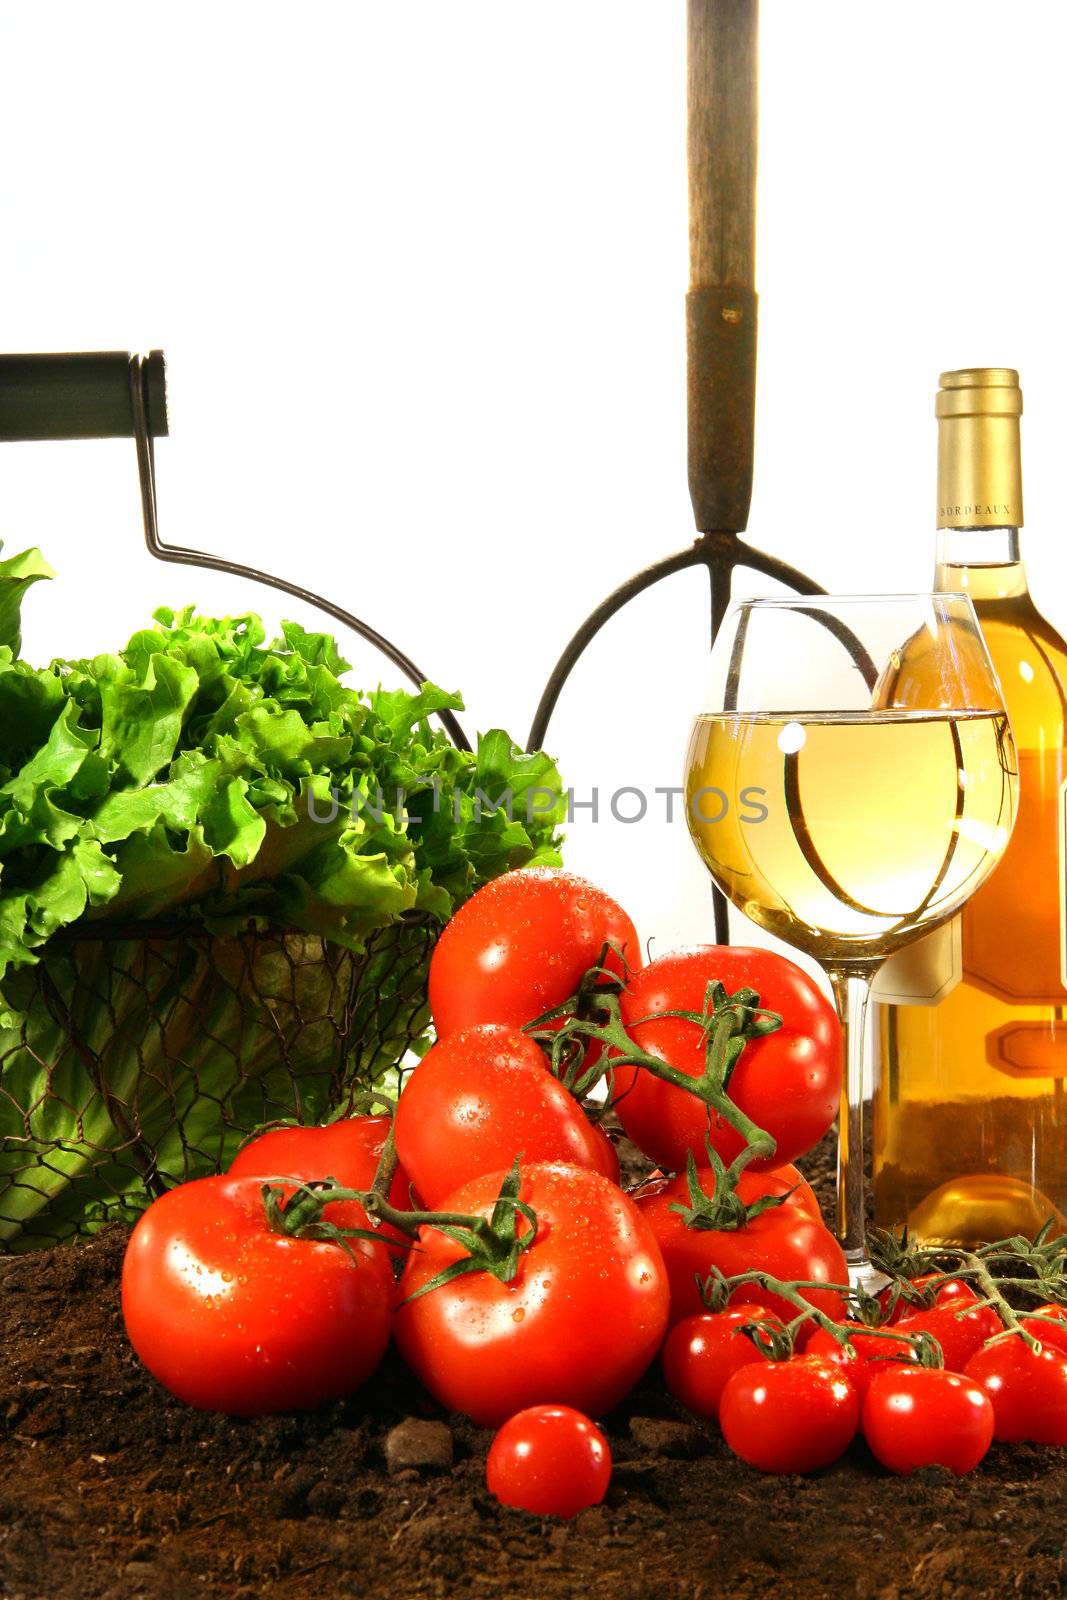 Fresh tomatoes, lettuce and wine by Sandralise